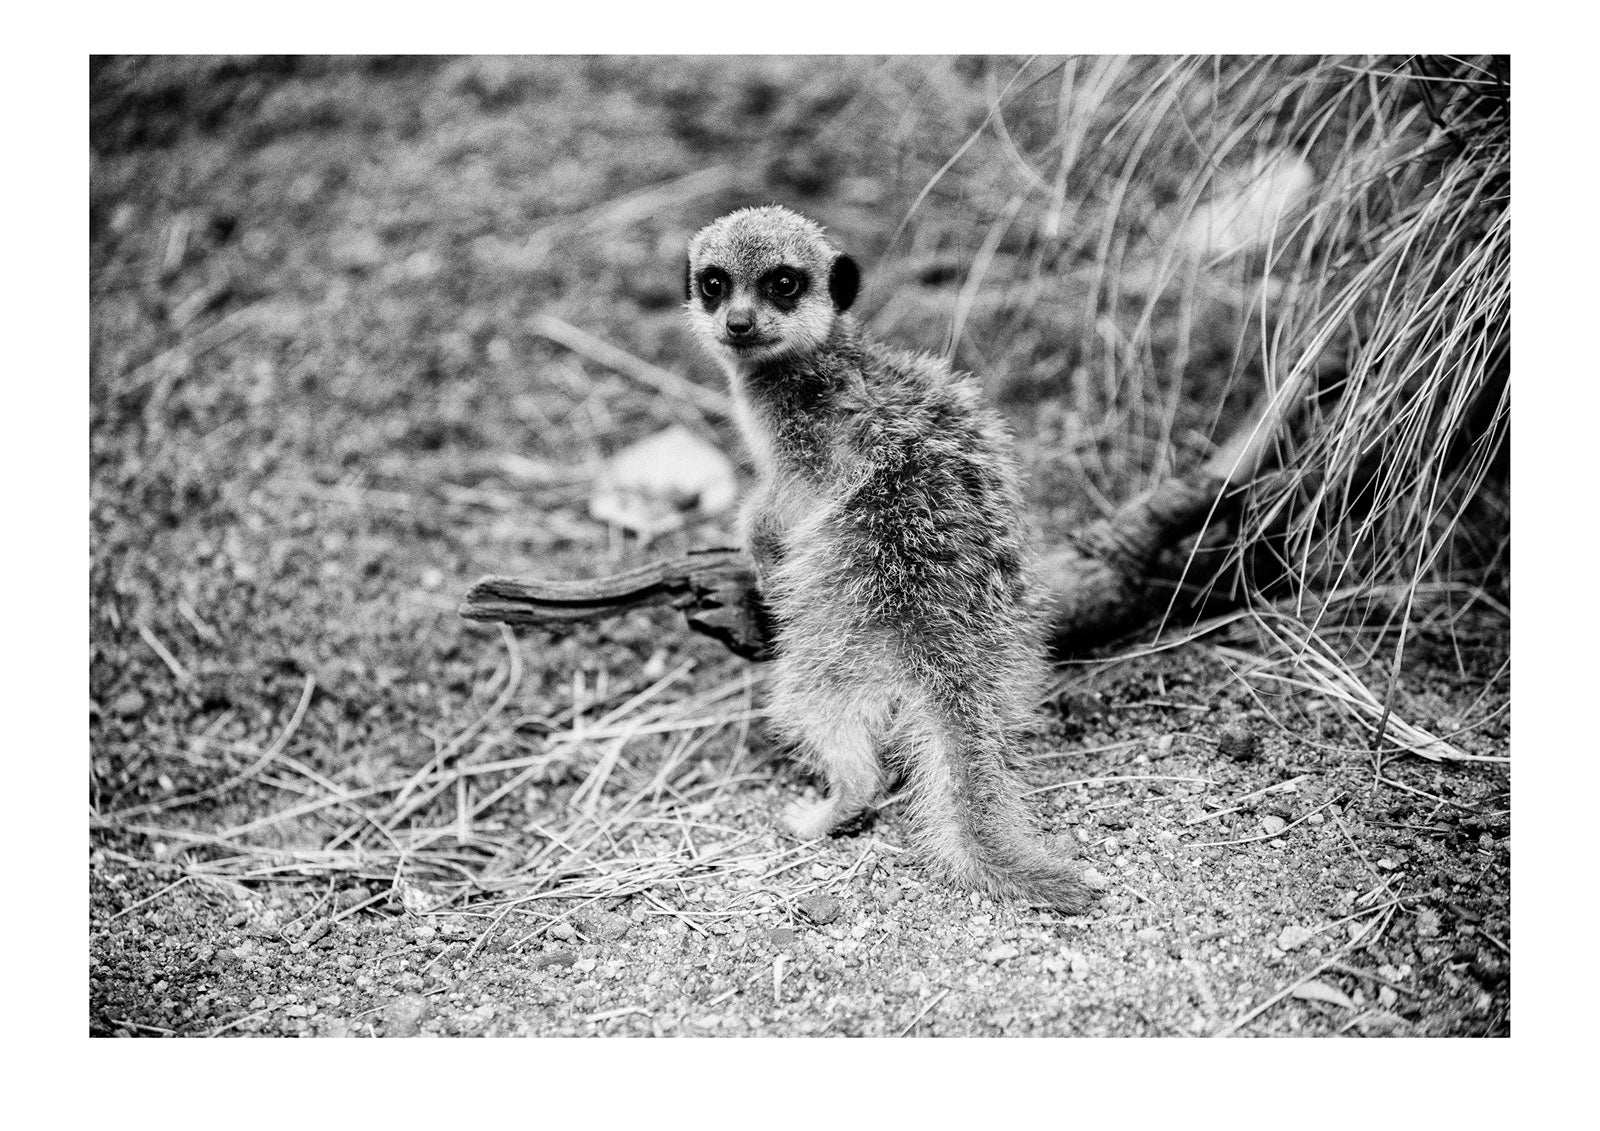 A Meerkat pup warms itself in the chill morning air. Captured on Ilford HP5 black and white negative film. Zoological Board of Victoria, Victoria, Australia.